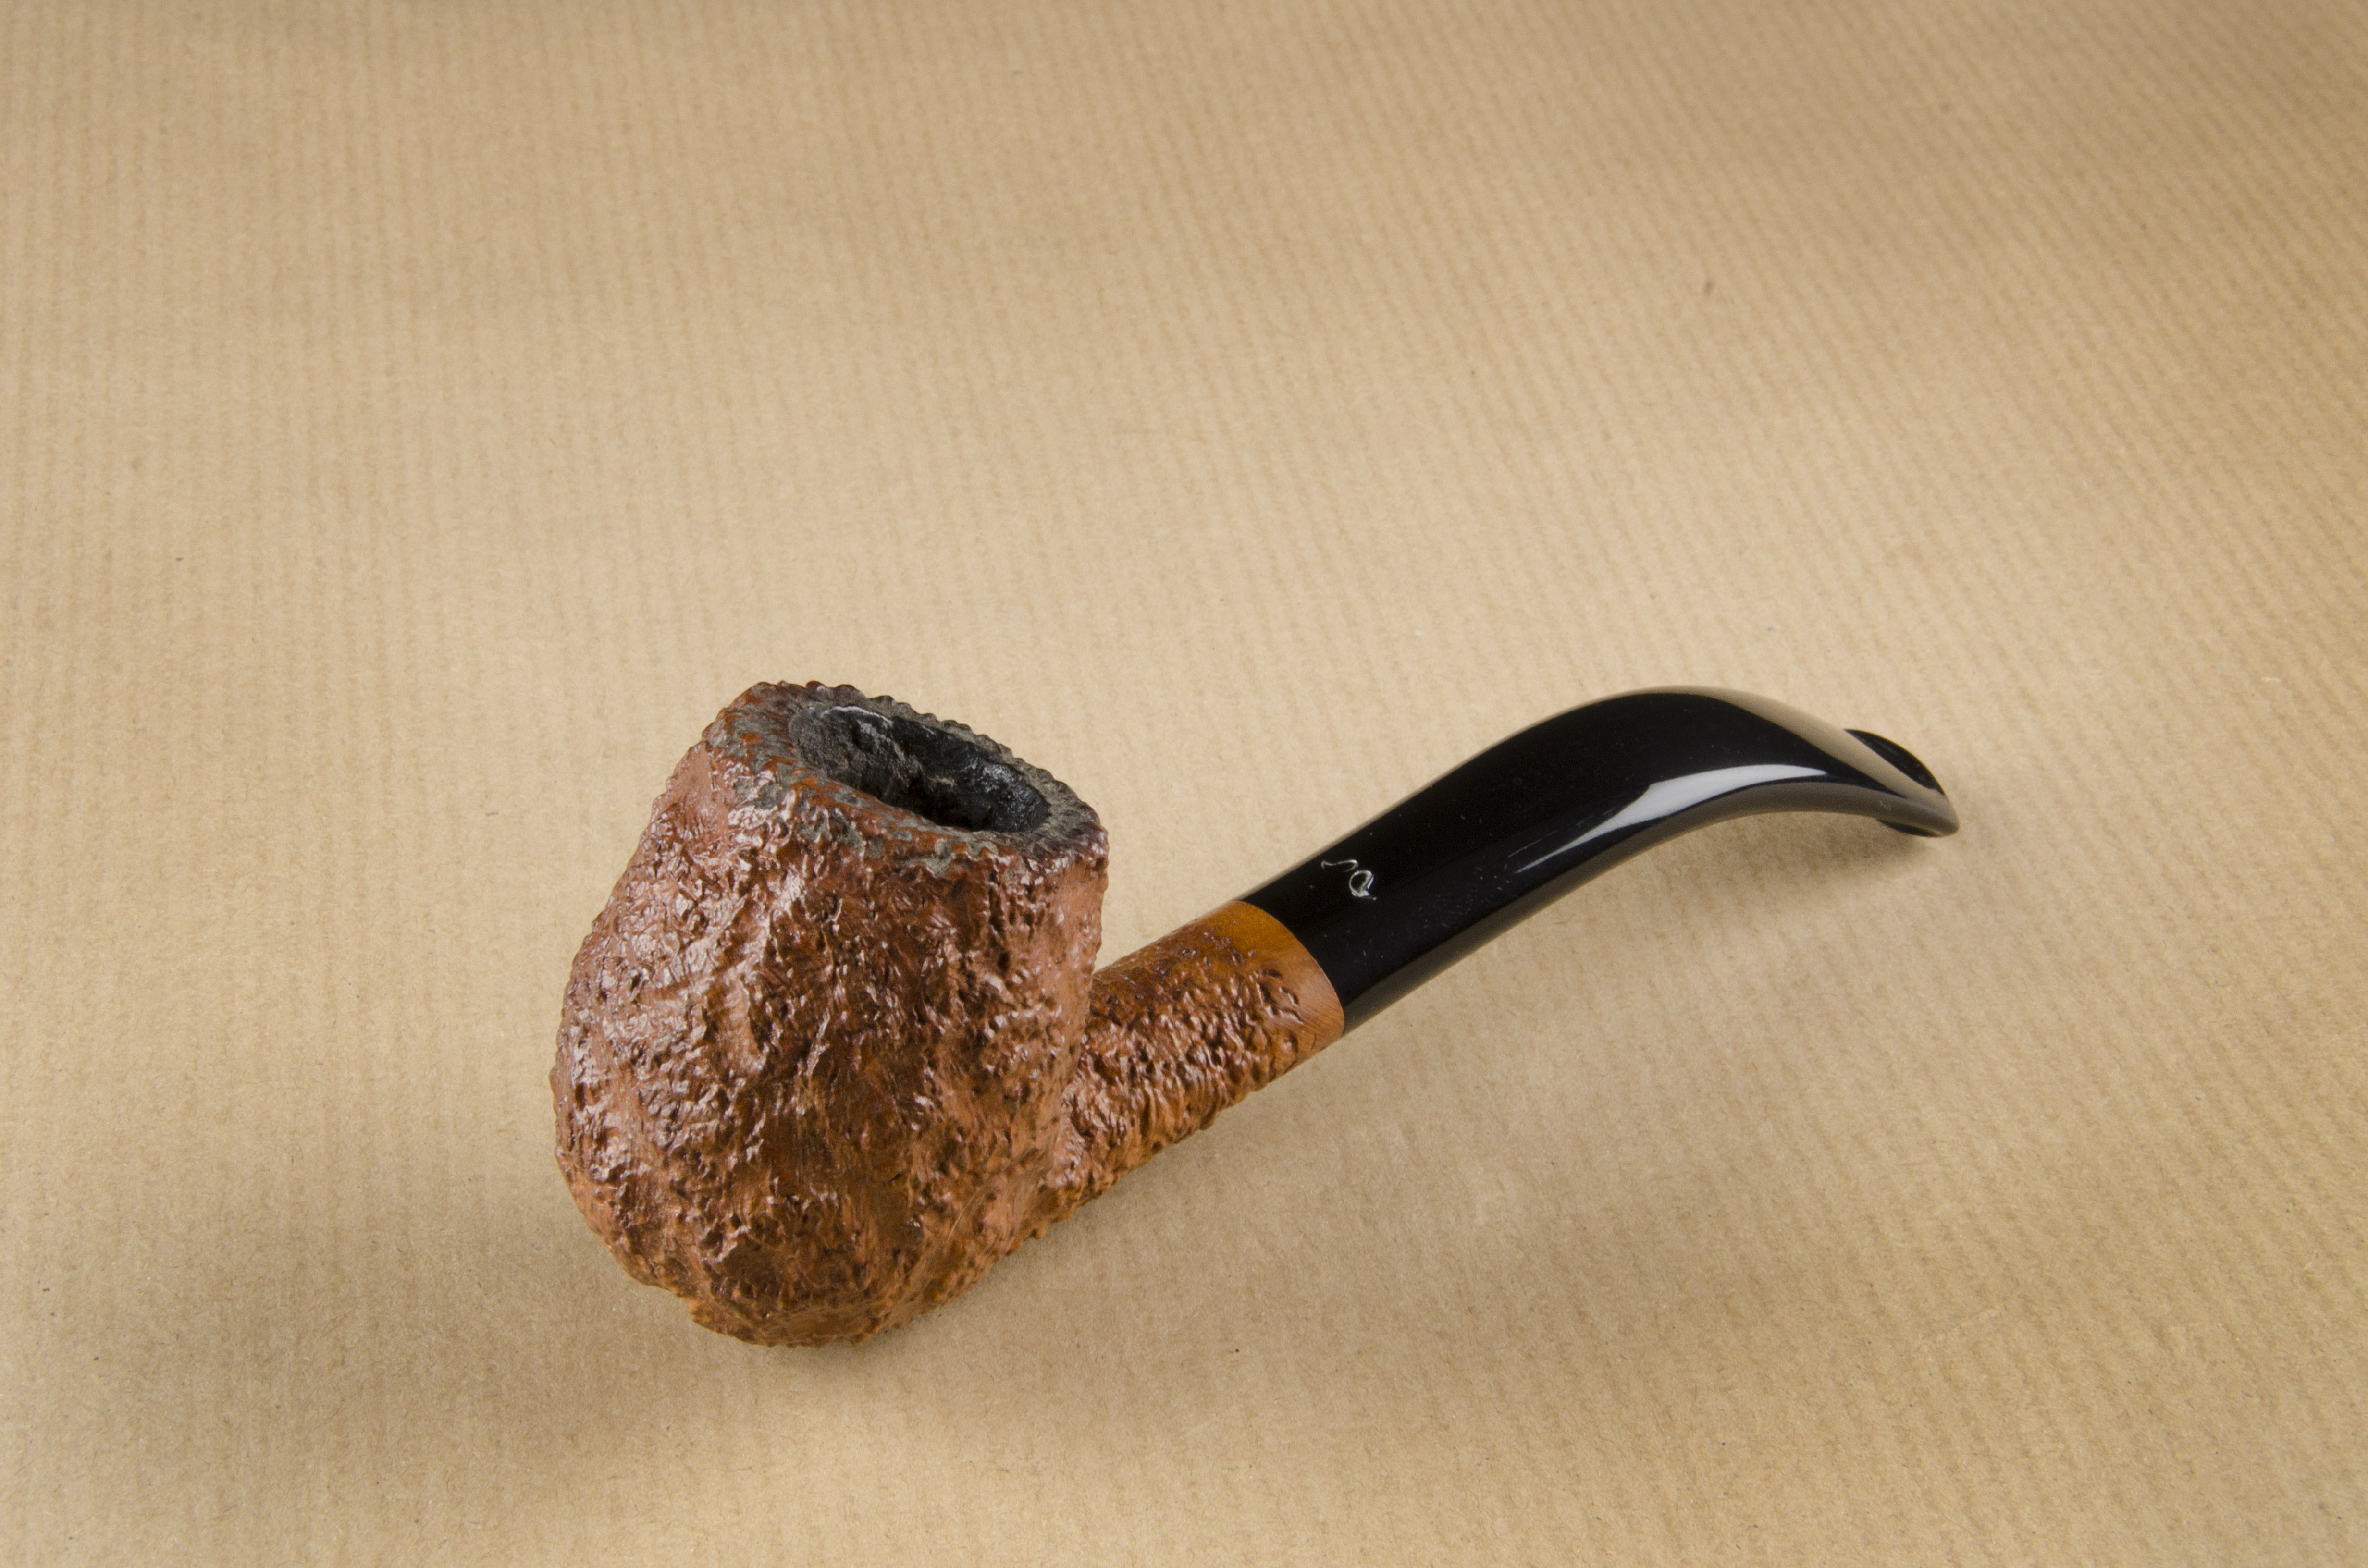 A Caminetto Business briar estate pipe, the rusticated curved bowl and shank, marked to base Hand